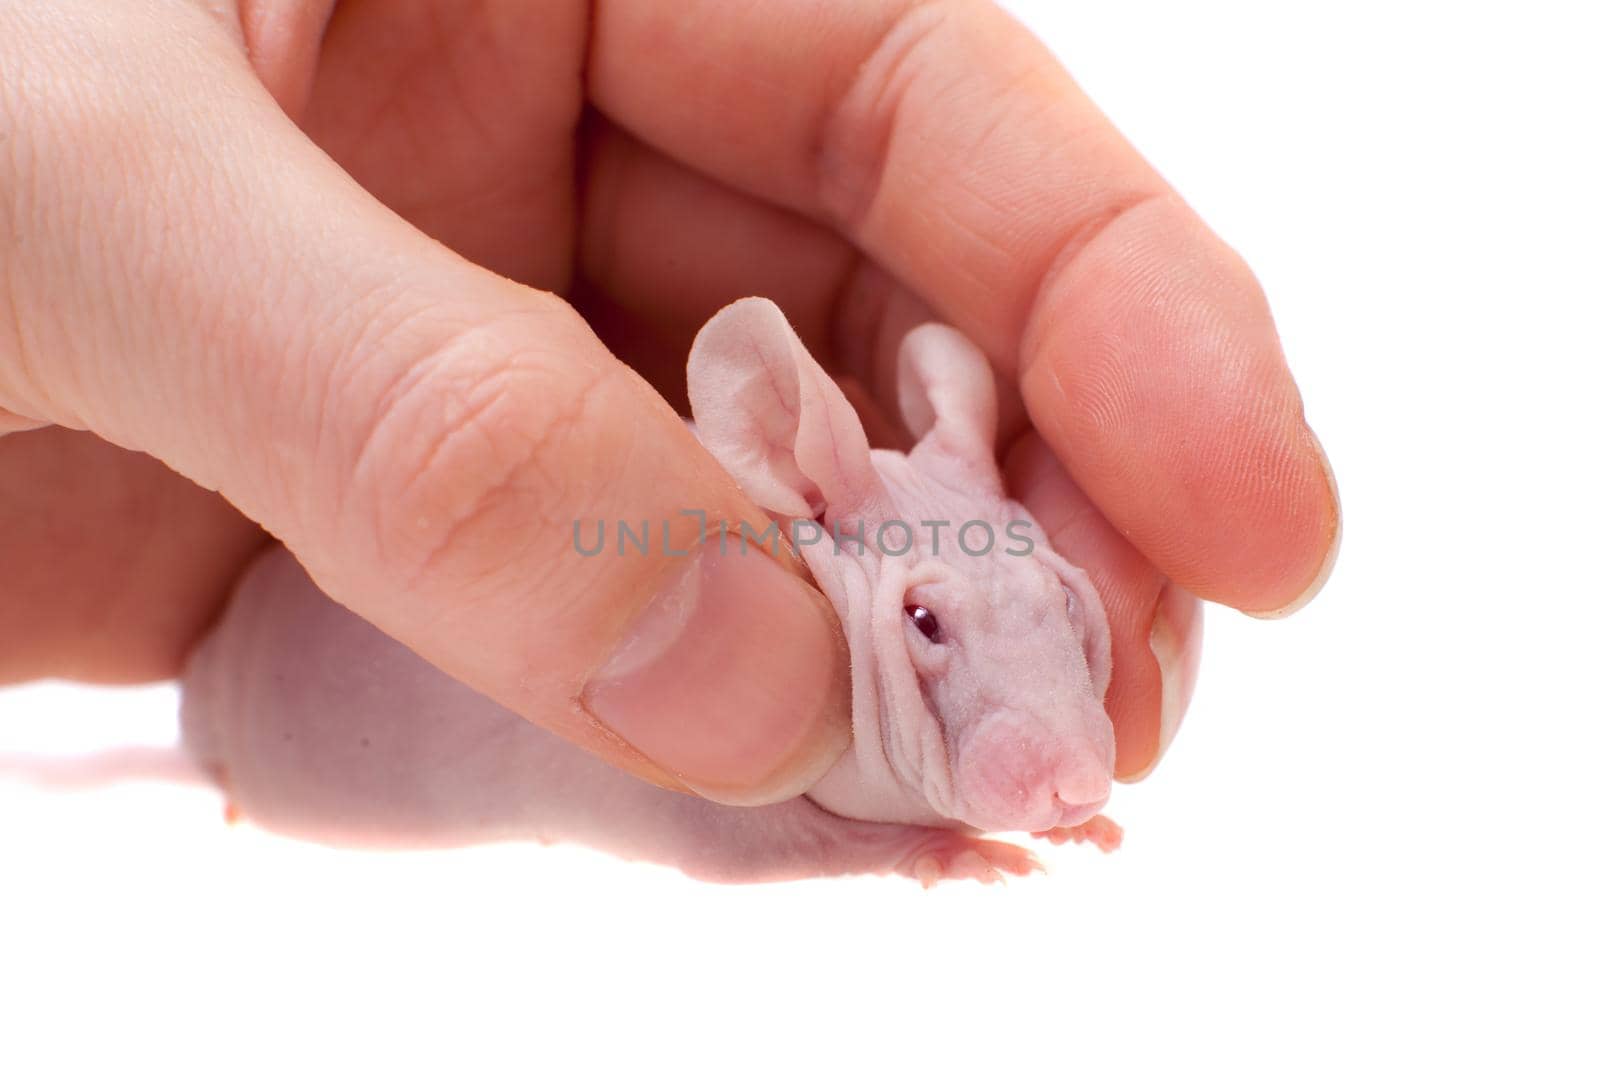 Hairless House mouse, Mus musculus isolated on white background